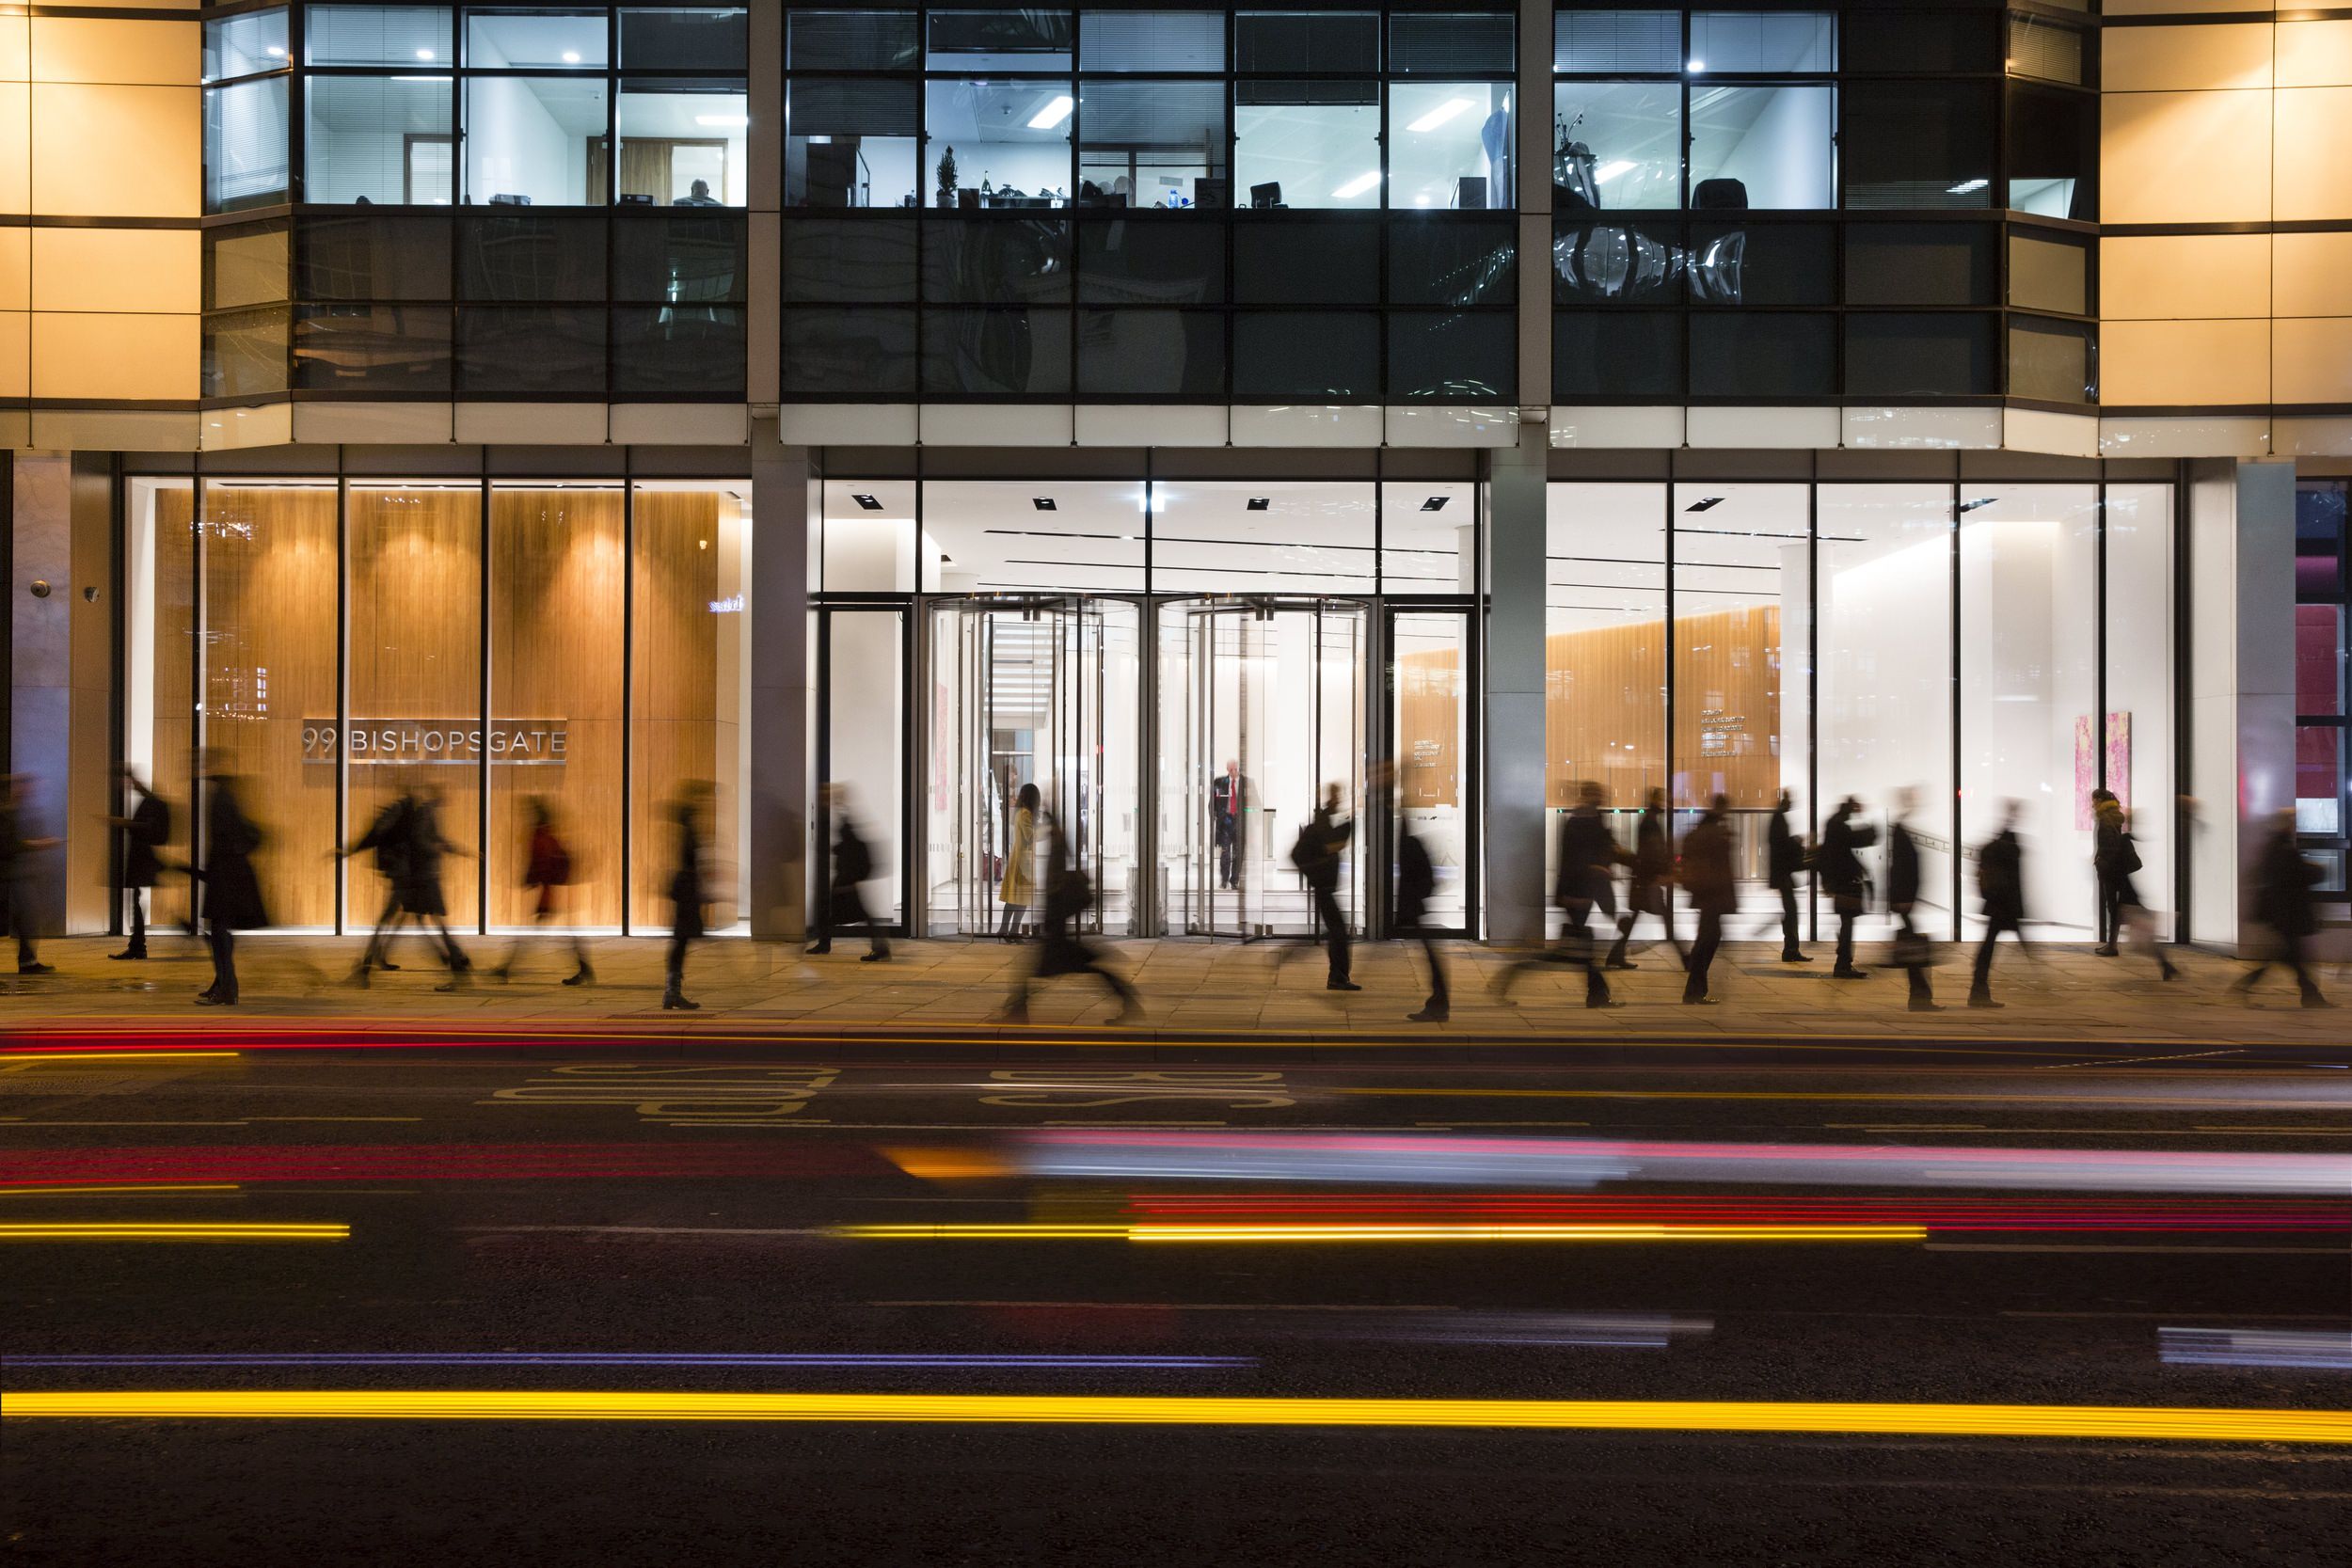 A crowd of people walking along the sidewalk that is in front of a building with glass panels.